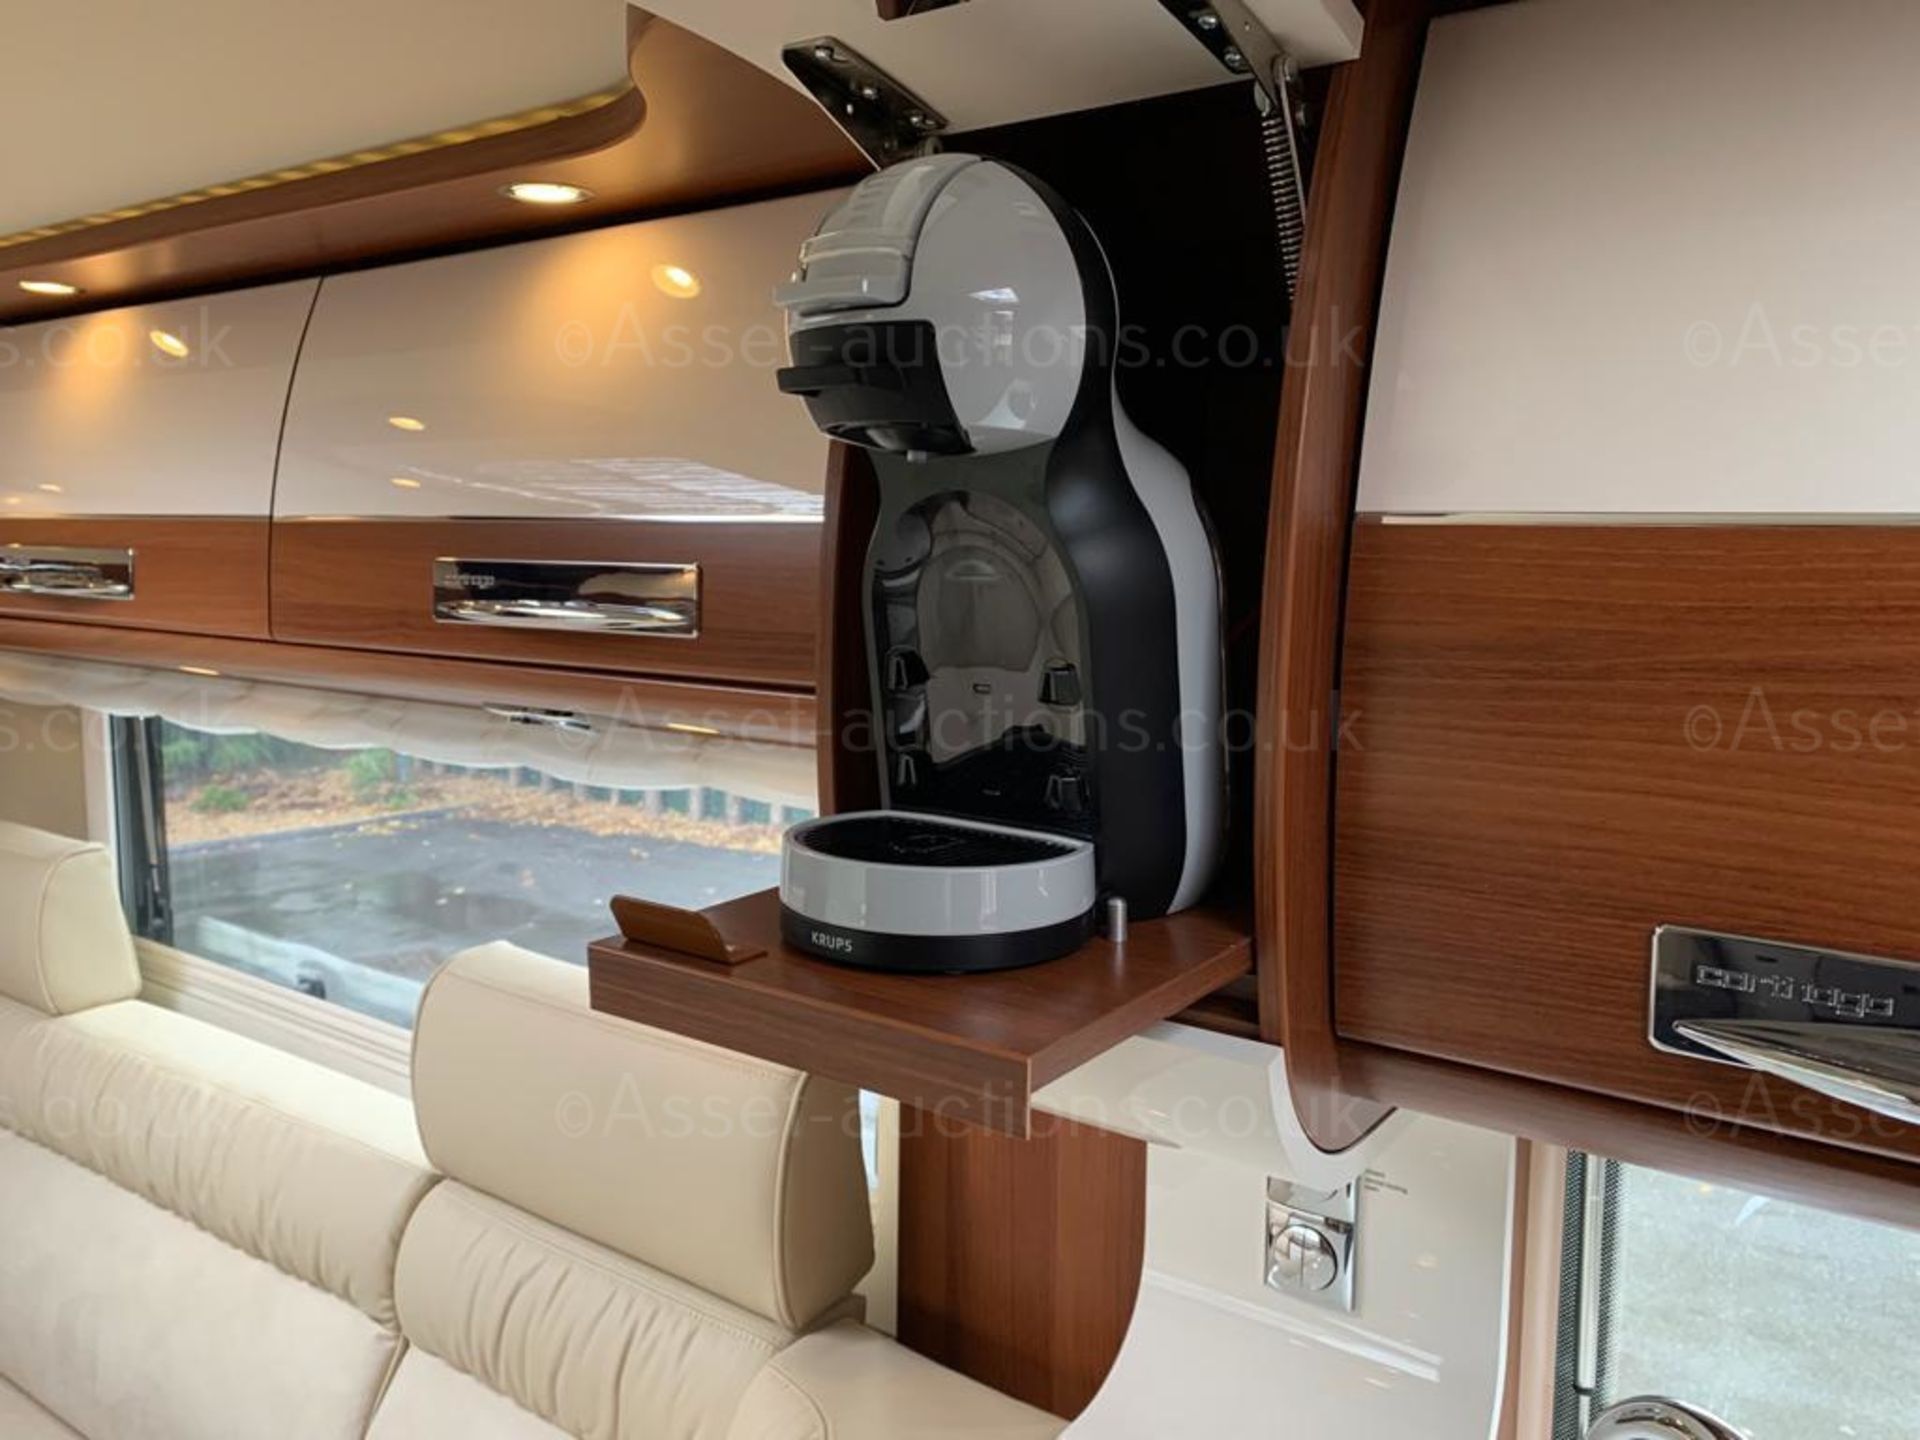 2020 CARTHAGO LINER-FOR-TWO 53L MOTORHOME, SHOWING 4529 MILES, MINT CONDITION *NO VAT* - Image 18 of 33